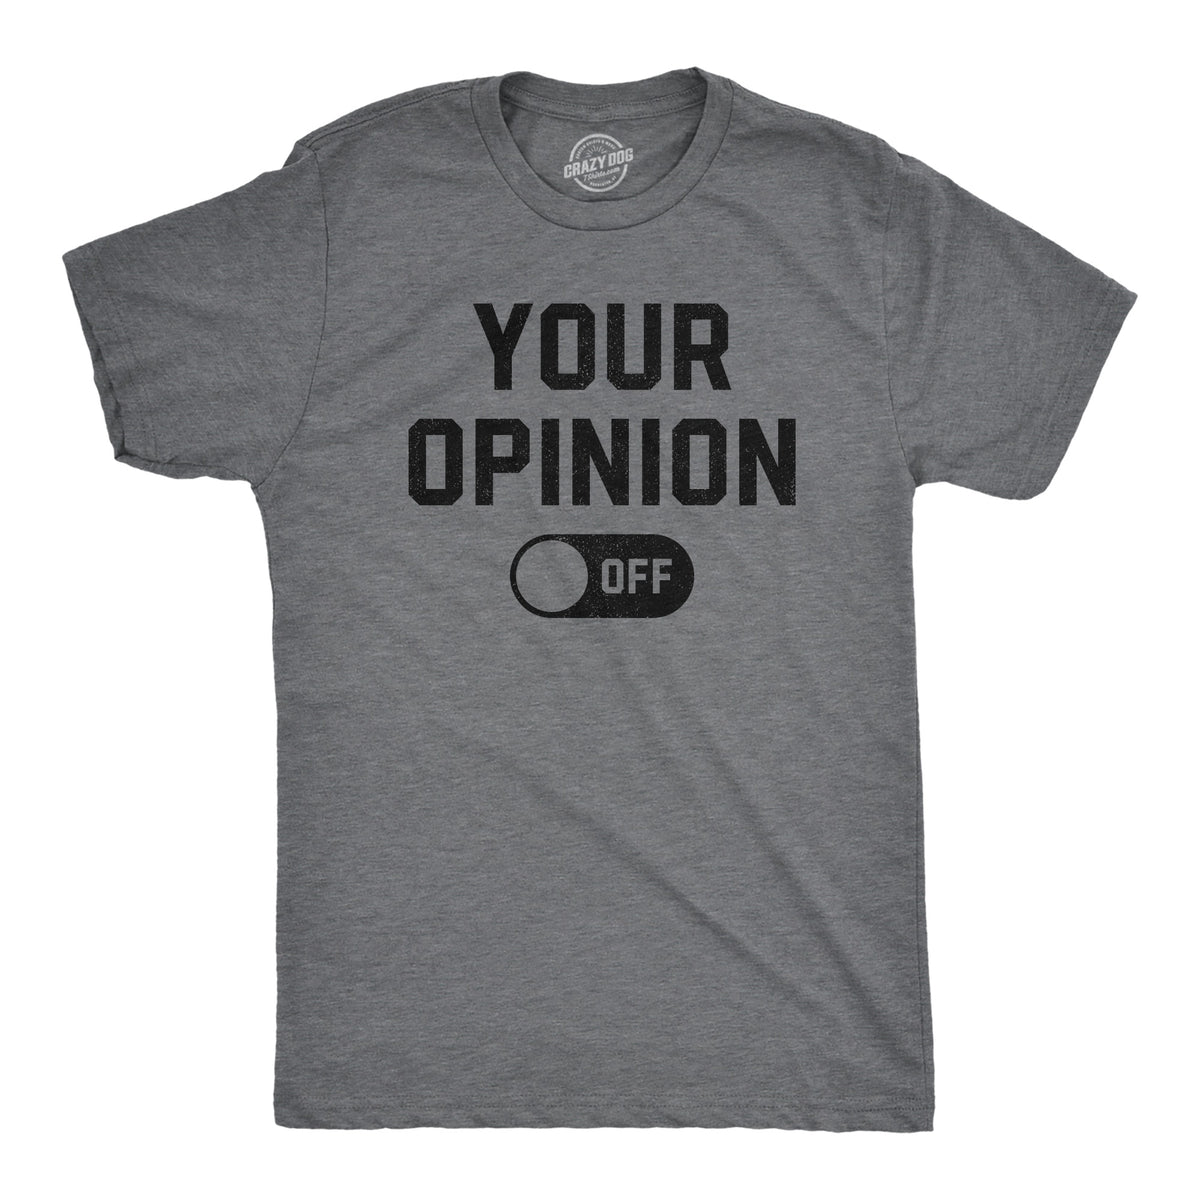 Funny Dark Heather Grey - OPINION Your Opinion Off Mens T Shirt Nerdy Sarcastic Tee